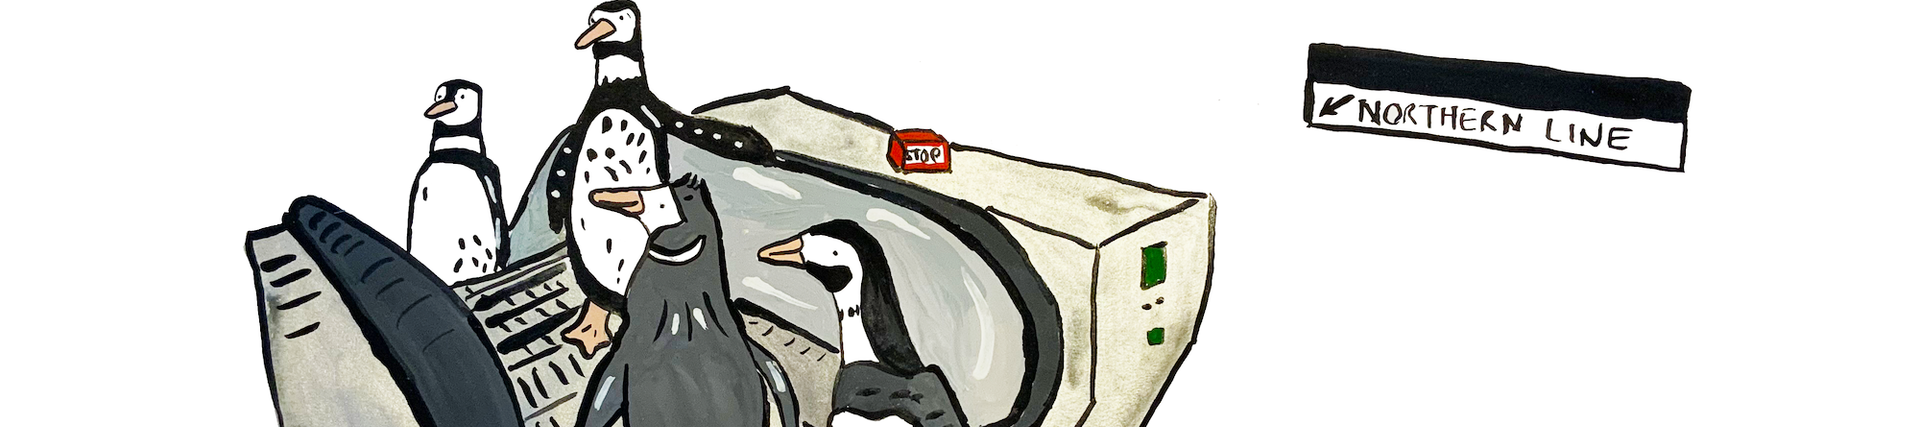 Drawing of four penguins riding down on Underground escalator. On the floor on the foreground is a red TfL roundel.